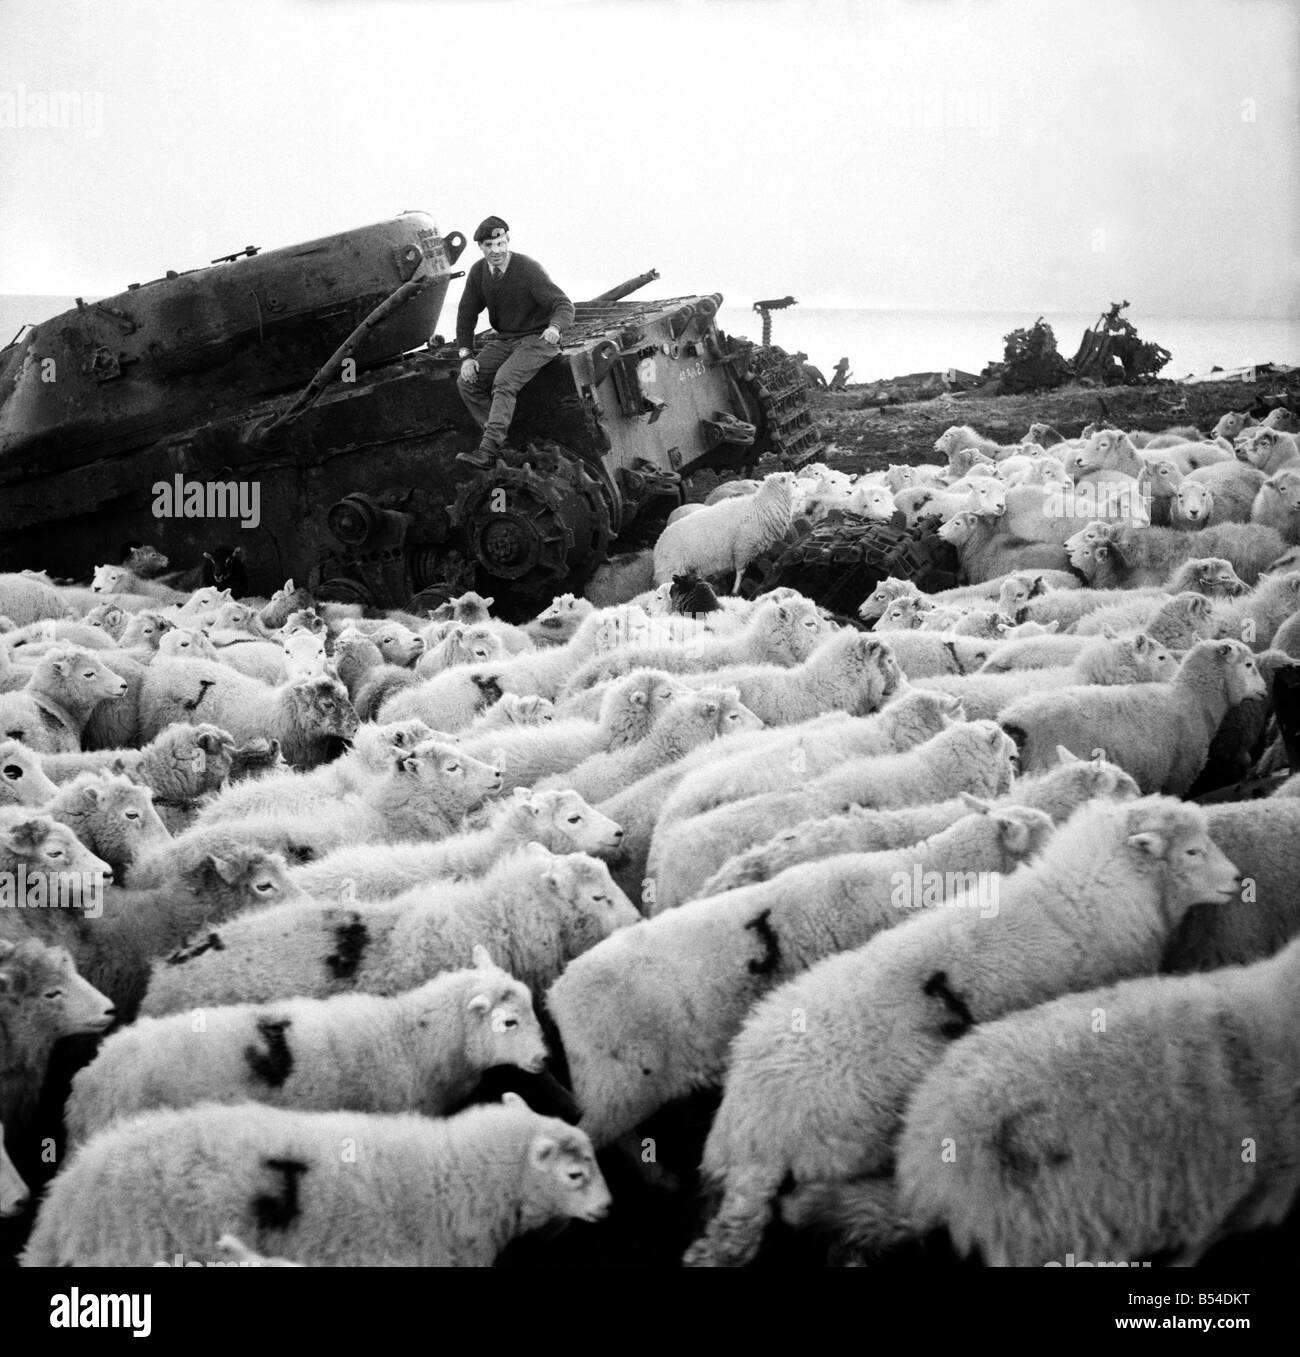 The Army threw open its 6,000 acre, tank range at Castle Martin, Pembs., for the North Pembrokeshire hillside farmers to graze their sheep. The sheep who came down from the cold' quickly sought the protection of the Conquerer target tank as a windshield and made 'shepherds' of Staff Sgt. Alan Healy, Trooper Bob Bartlett, and L/Cpl Lawrence Carter members of the 1st The Queens Dragoon Guards, R.A.C. who were making an inspection of the target tanks on the Castle Martin range. December 1969 Z11477-001 Stock Photo